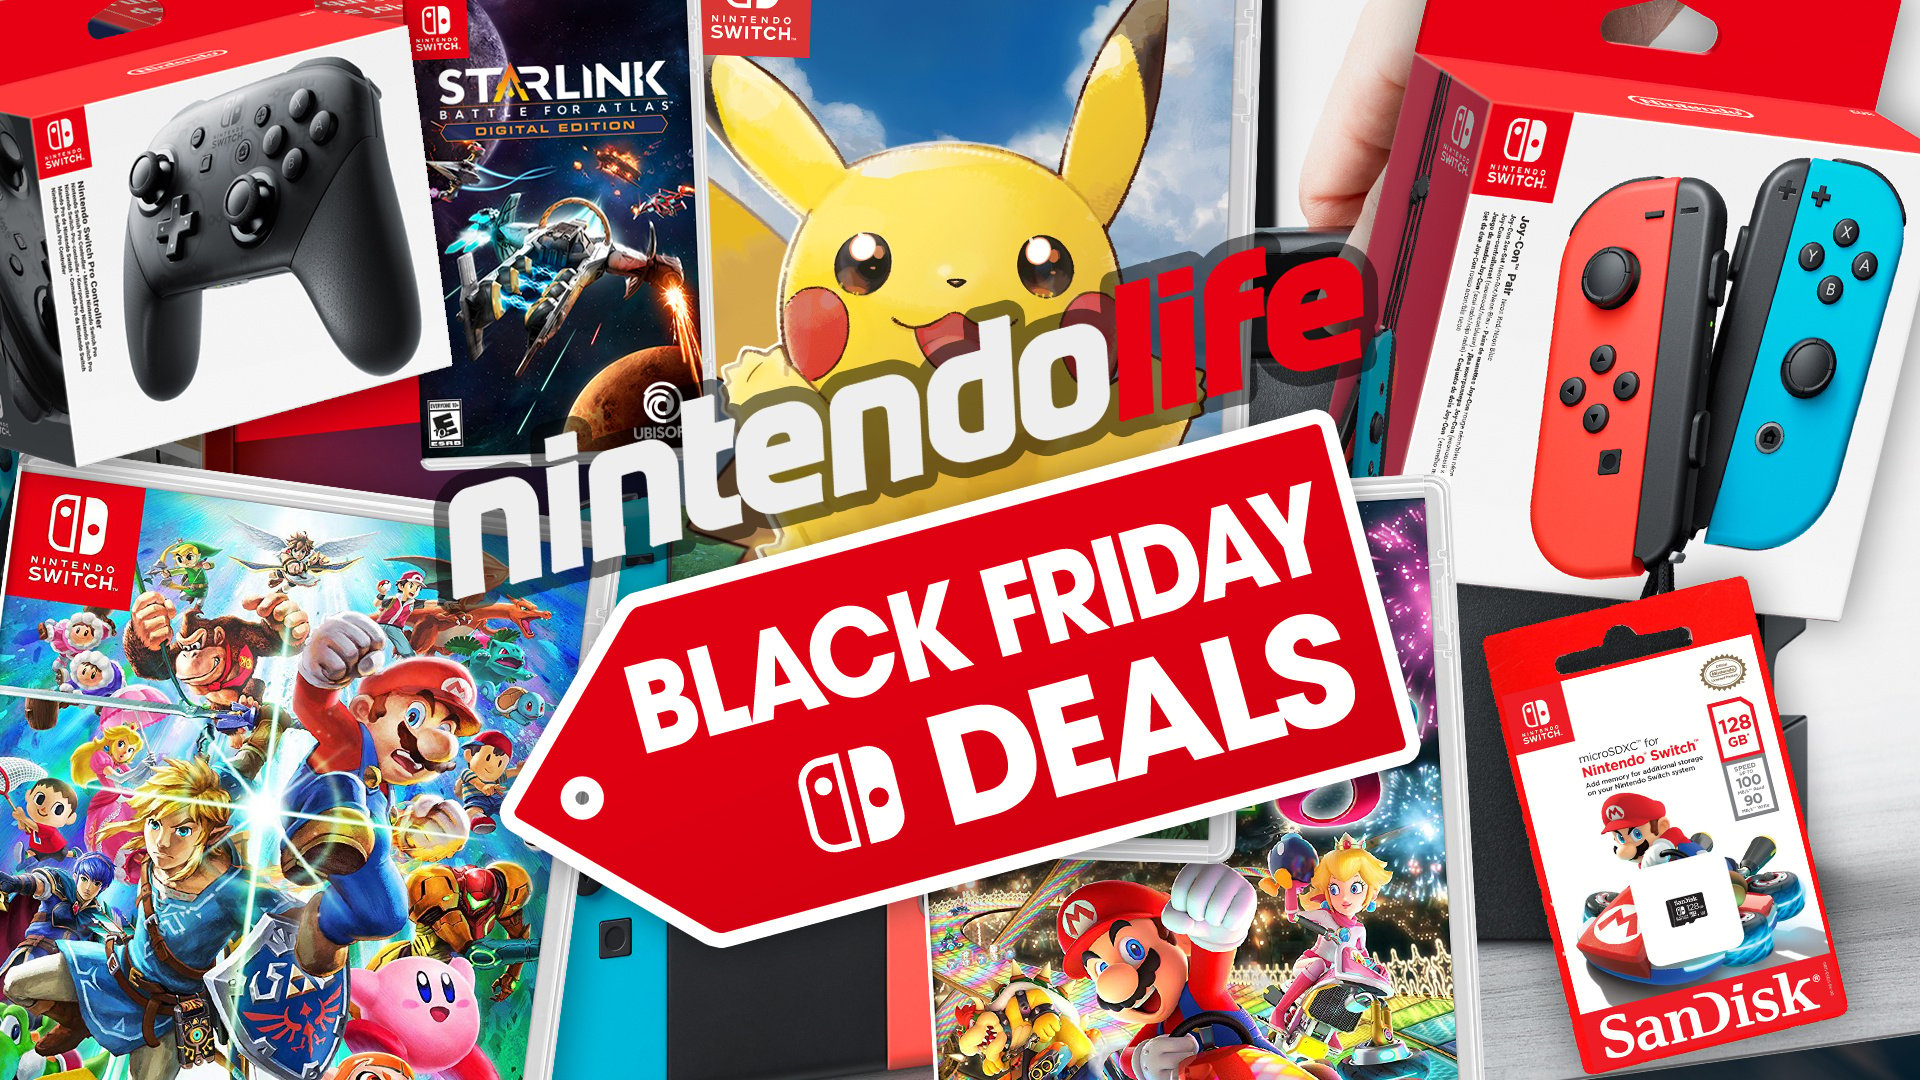 Best Nintendo Switch Black Friday 2018 Deals - Guide - Nintendo Life - Will There Be Black Friday Deals On Switch